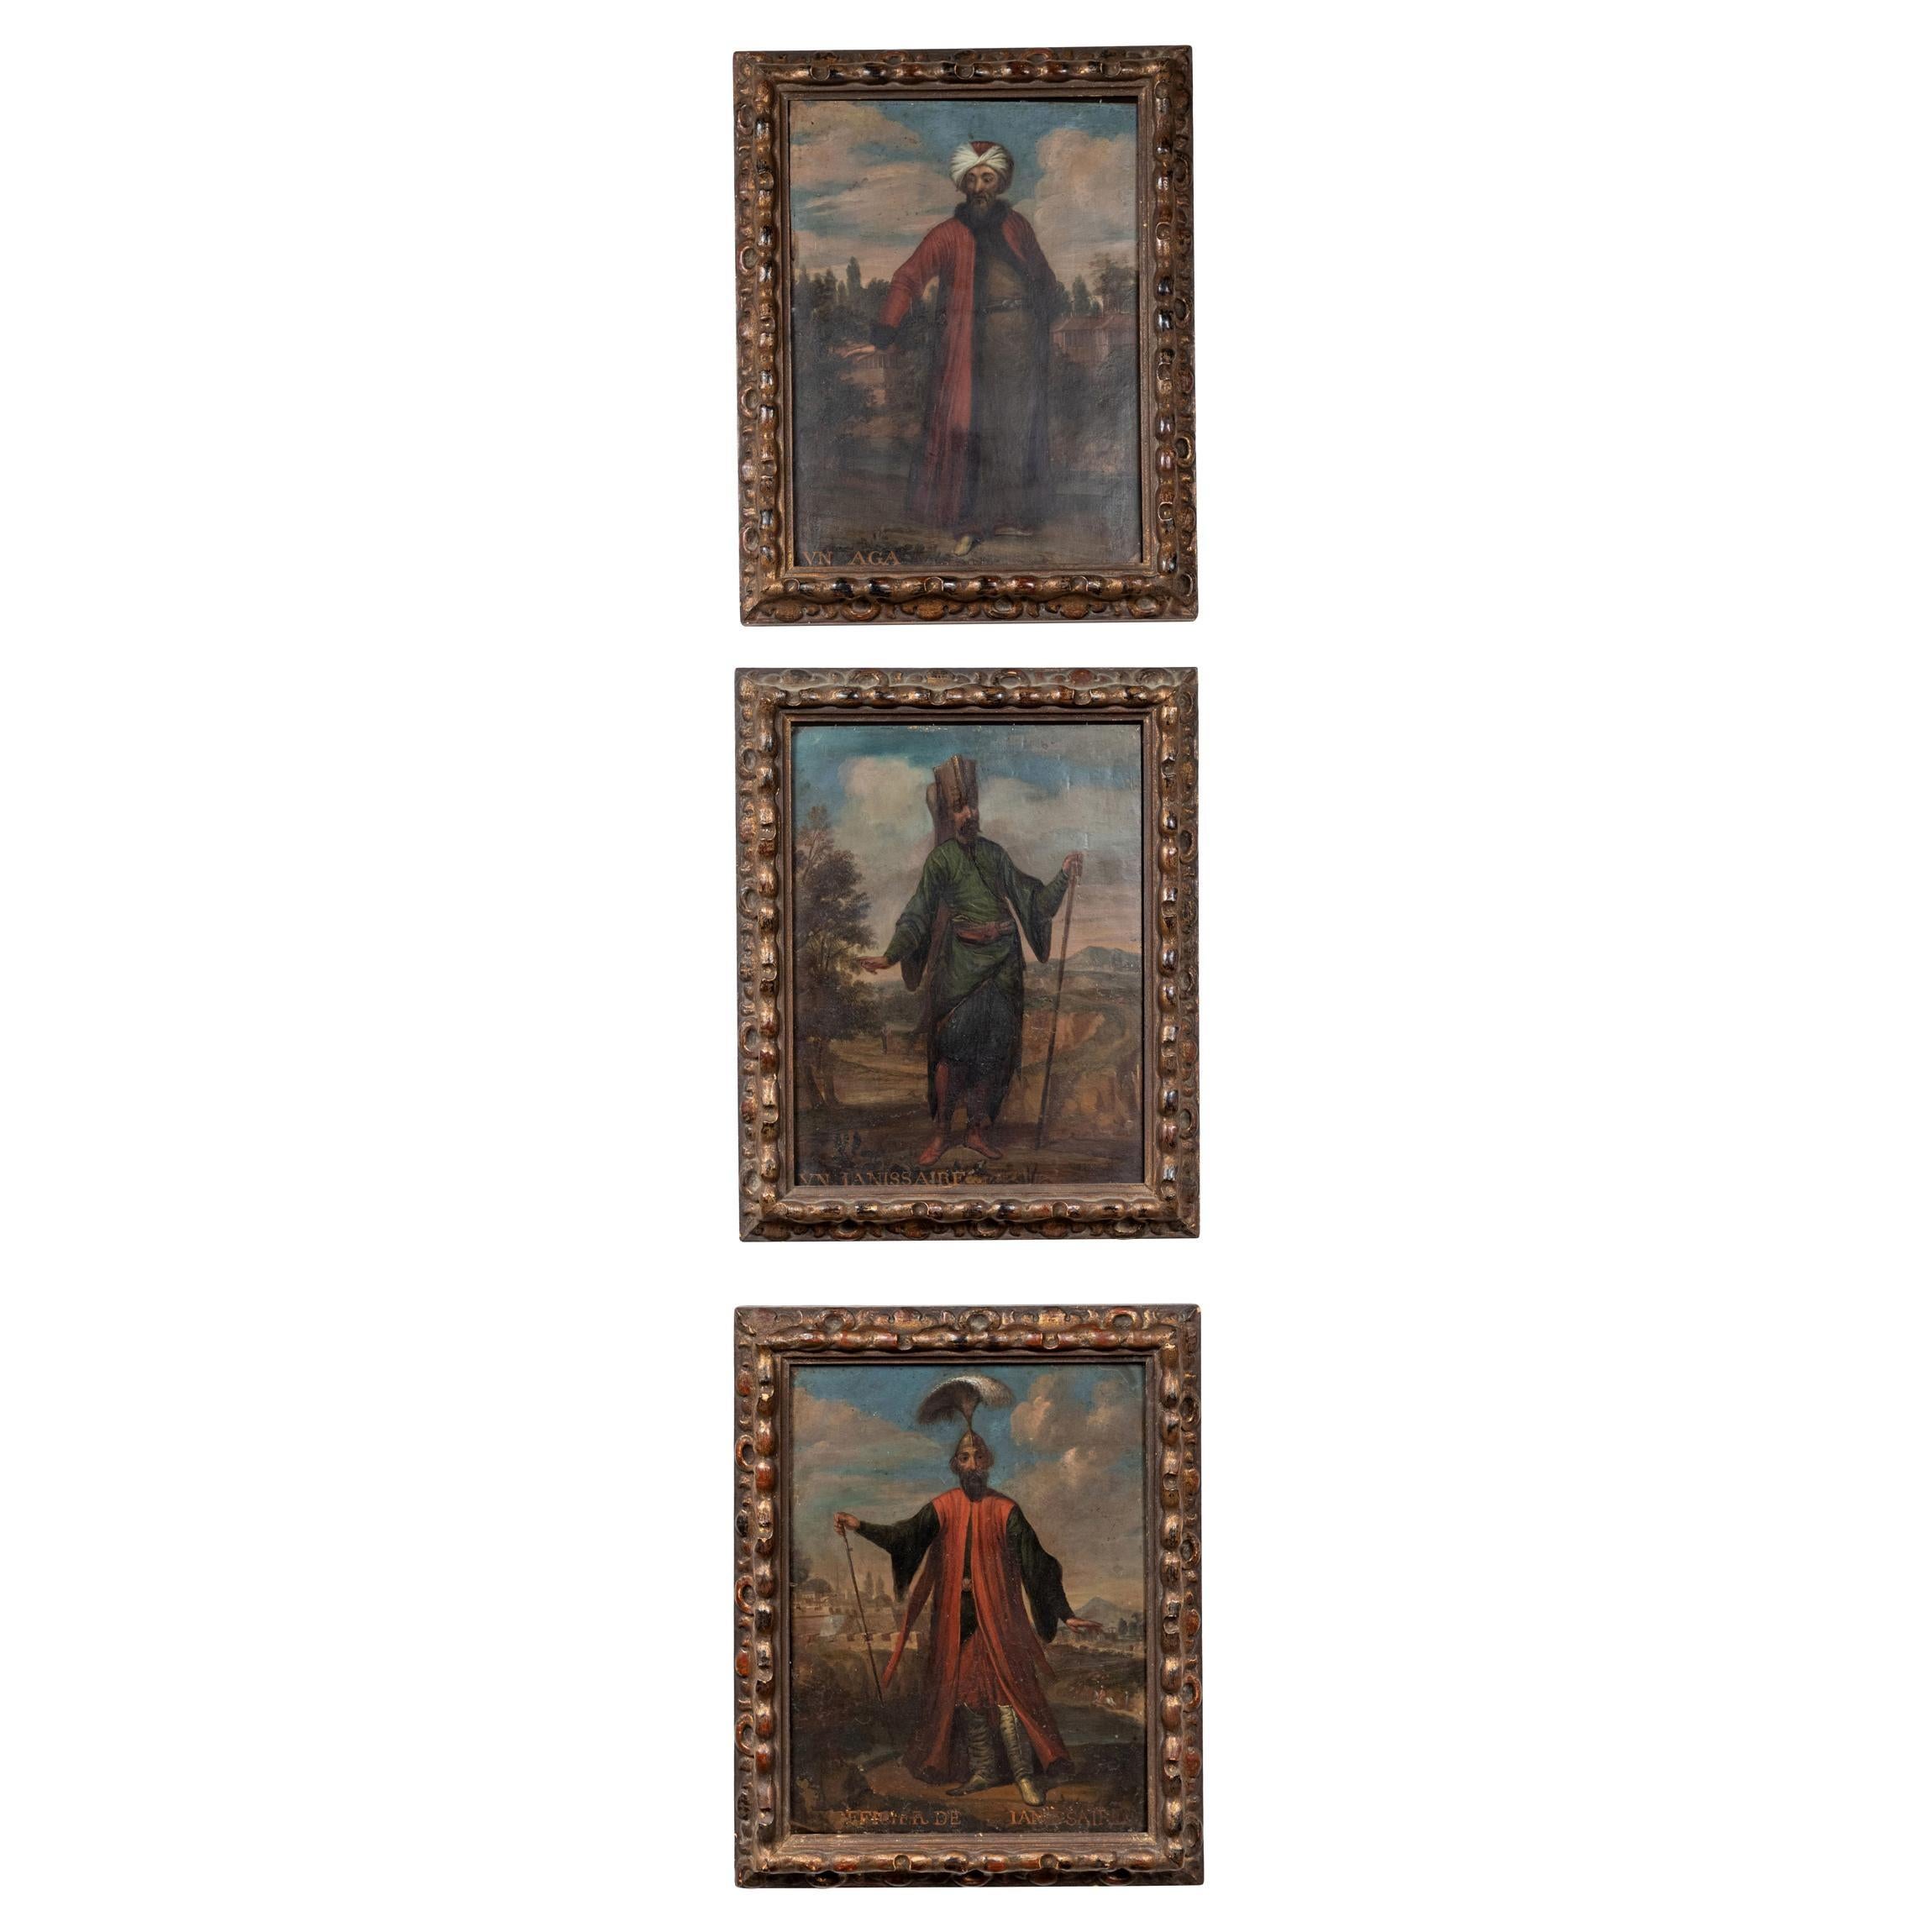 A remarkable trio of 18th century, oil-on-copper paintings of, Ottoman Empire figures in colorful robes and accouterments, posing in European style landscapes. Each figure is labeled on the lower left, and reveals their rank in an elite infantry